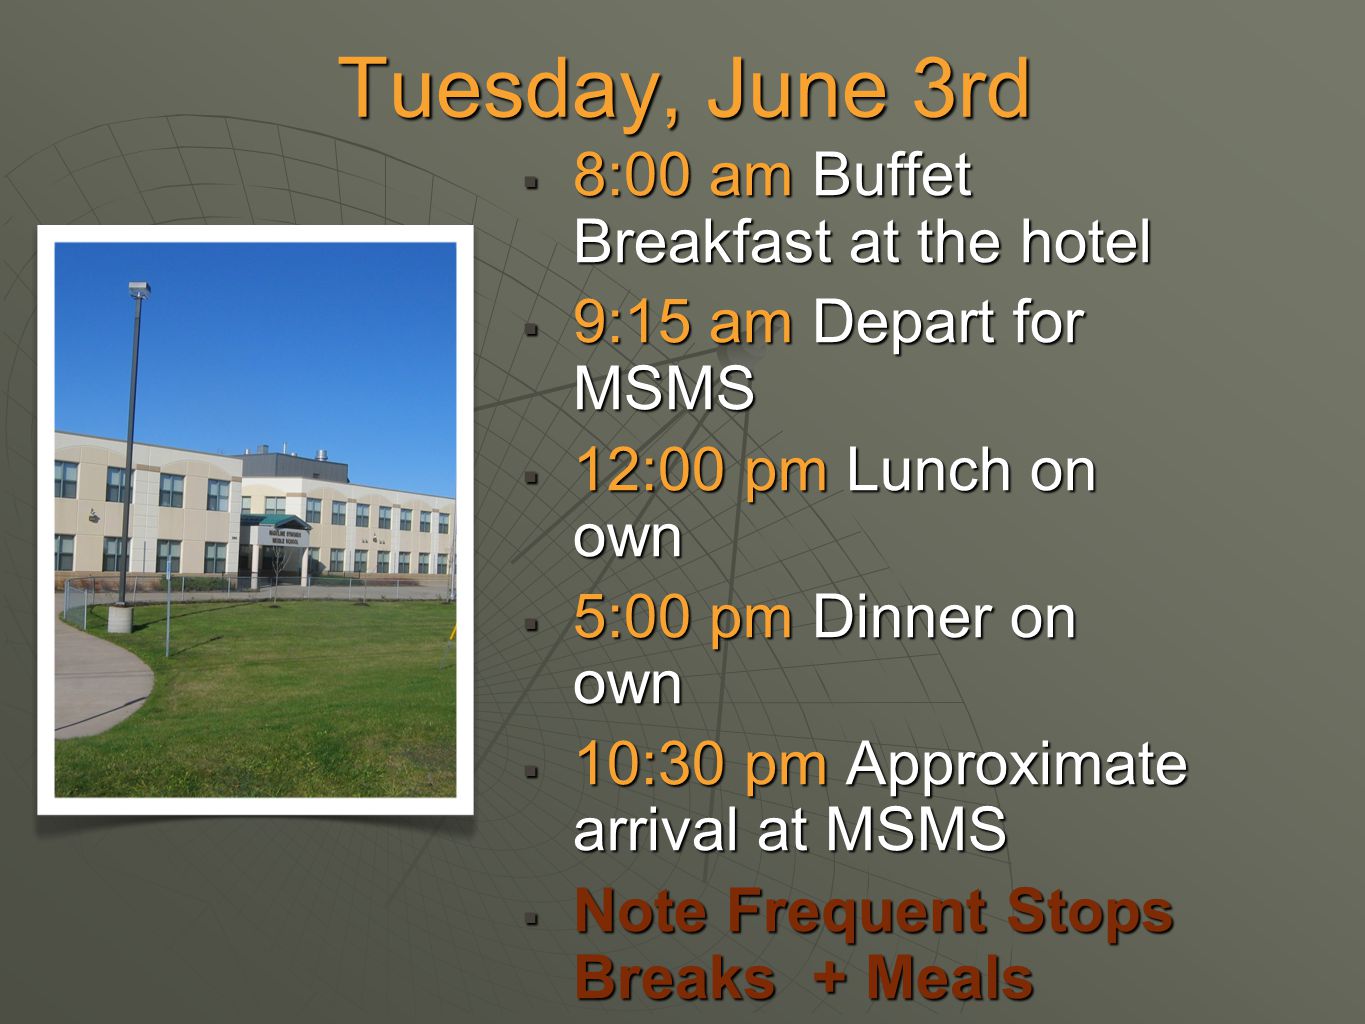 Tuesday, June 3rd  8:00 am Buffet Breakfast at the hotel  9:15 am Depart for MSMS  12:00 pm Lunch on own  5:00 pm Dinner on own  10:30 pm Approximate arrival at MSMS  Note Frequent Stops Breaks + Meals